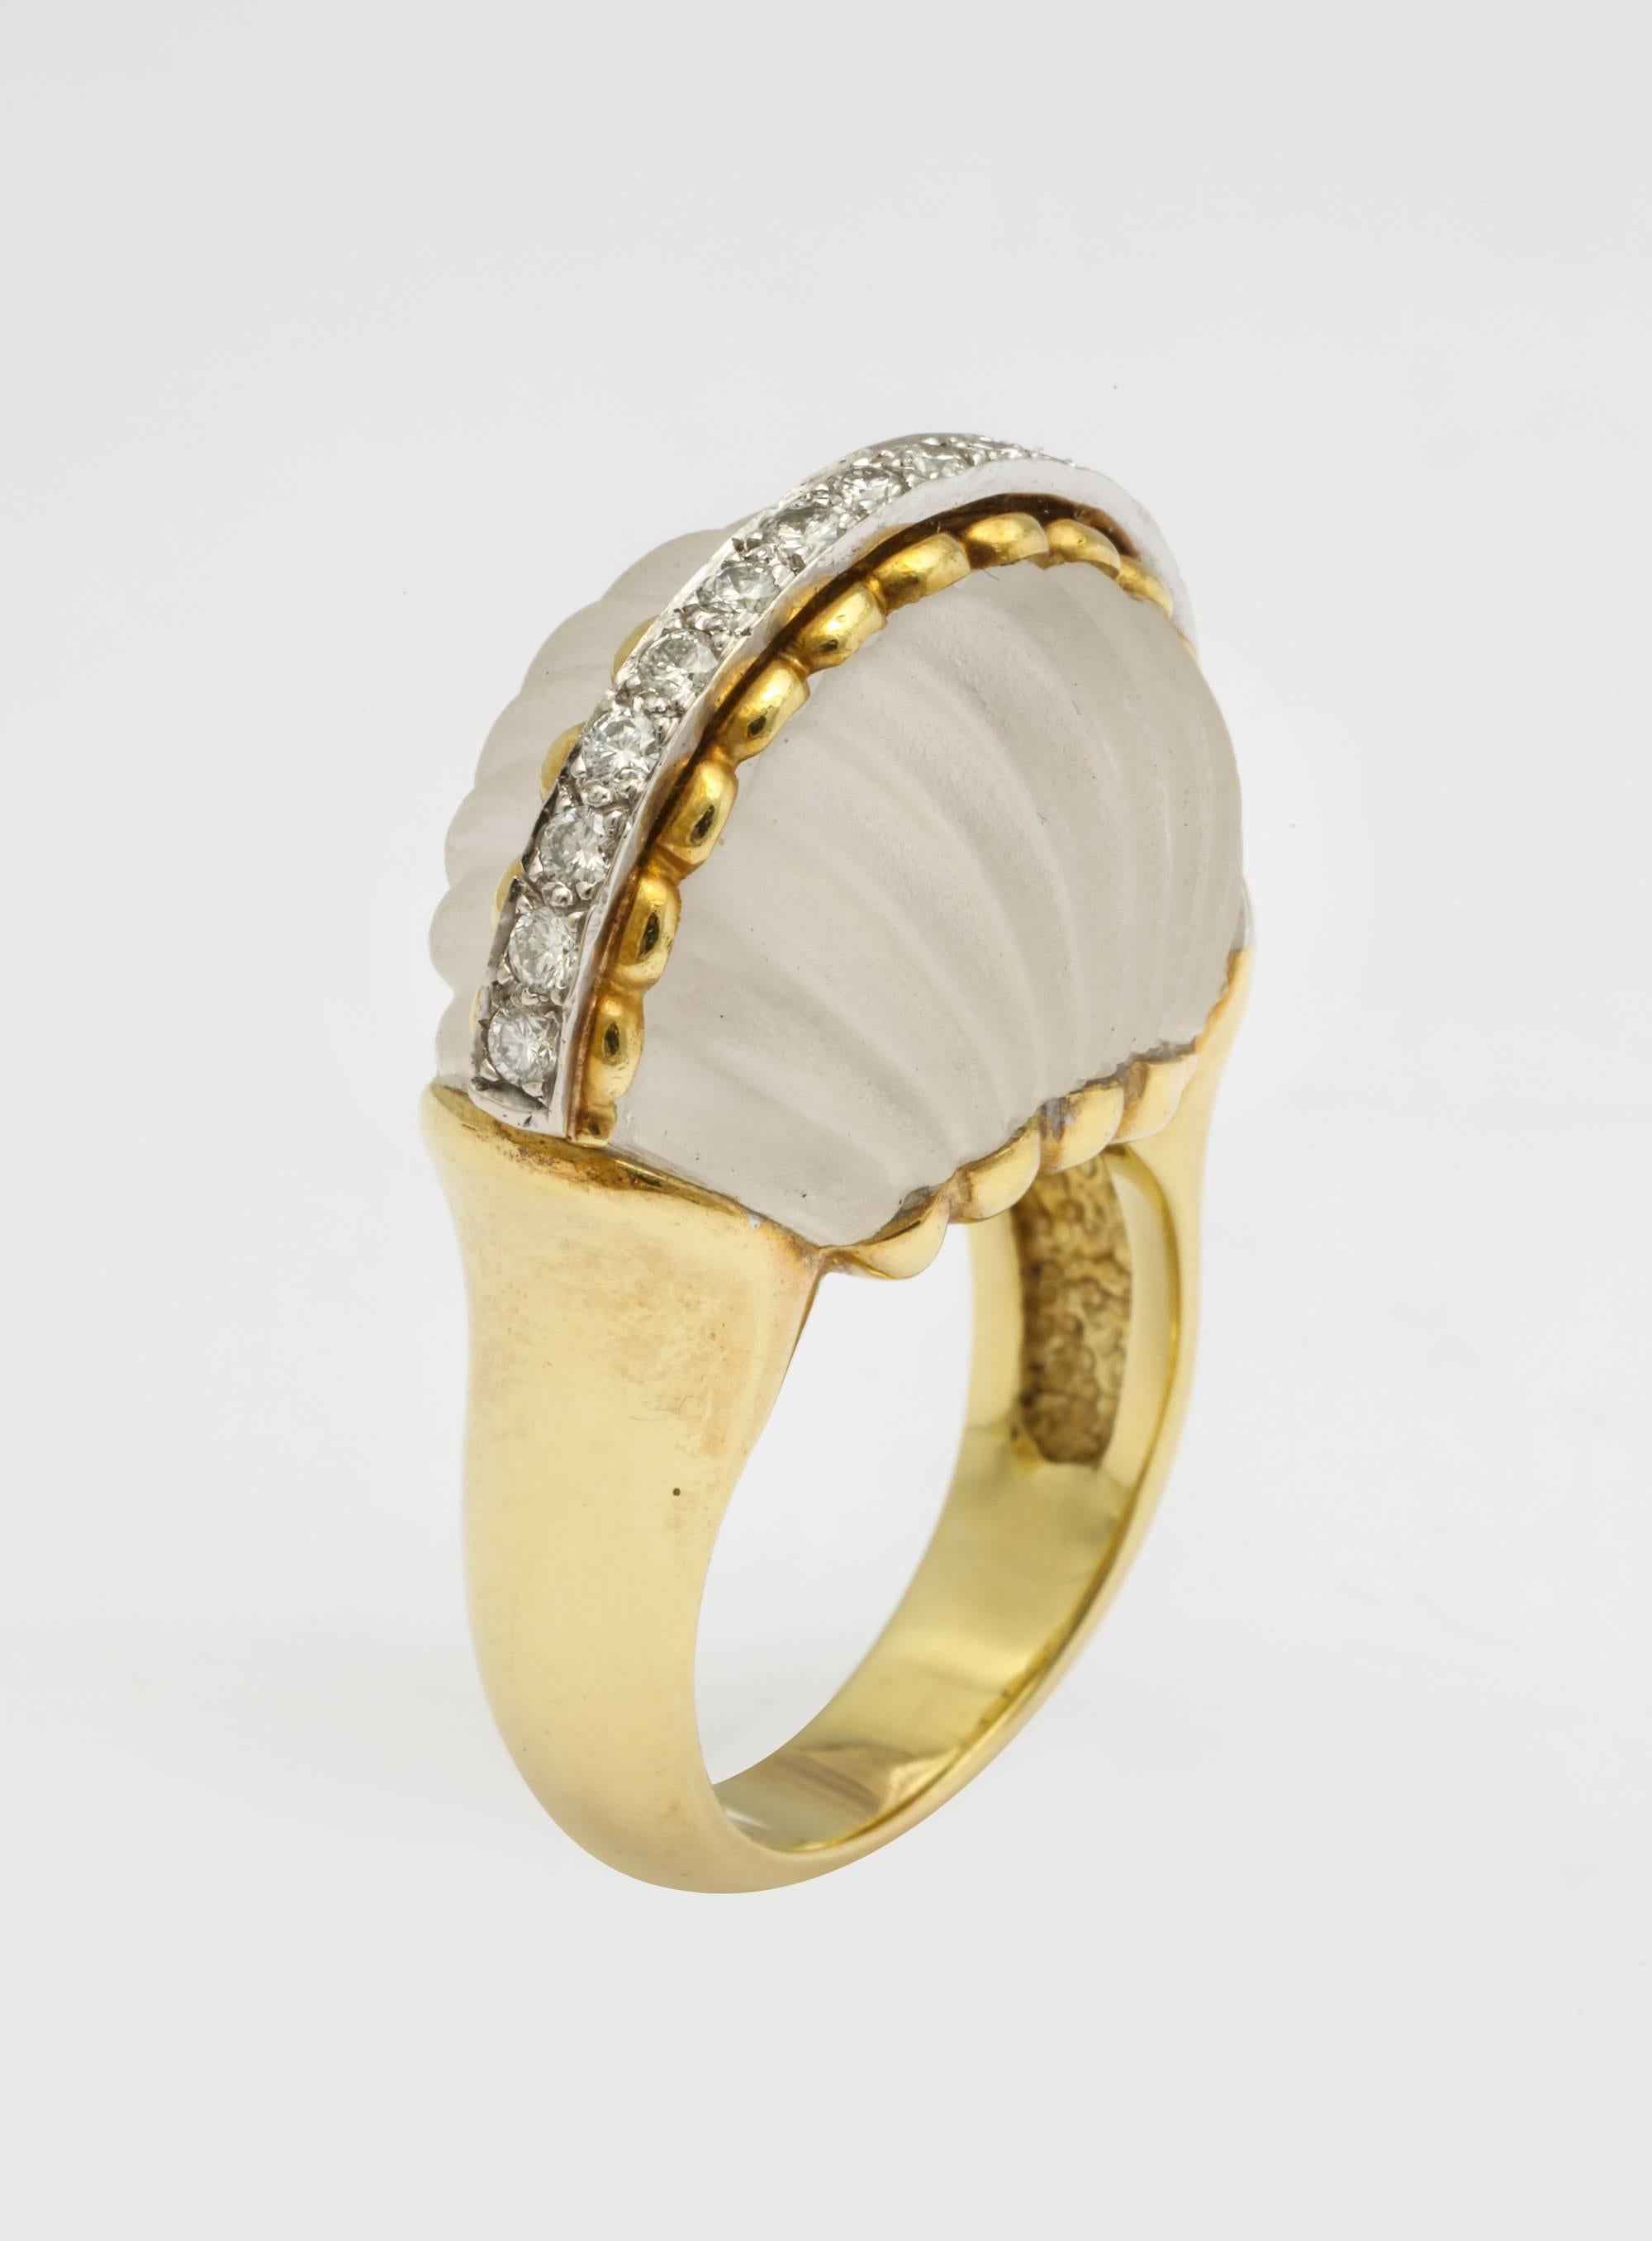 A high domed frosted rock crystal cocktail ring by Le Triomphe of 18K gold with a single band of diamonds spanning the crown. Gold and makers marks. Fits a size 7 1/2 finger.